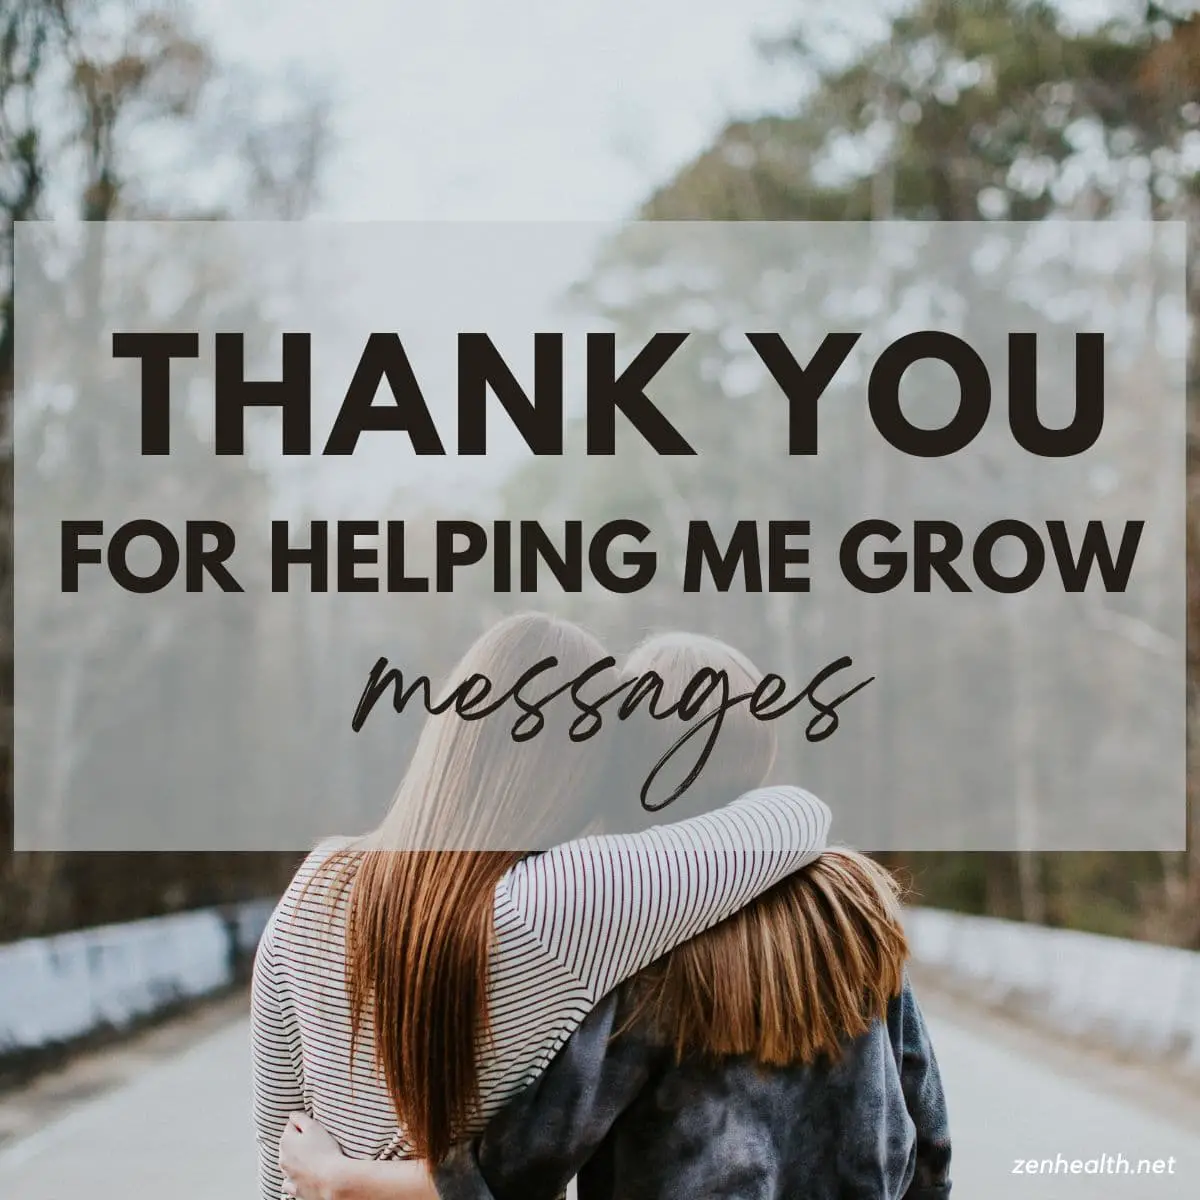 thank you for helping me grow messages text overlaid on two women hugging